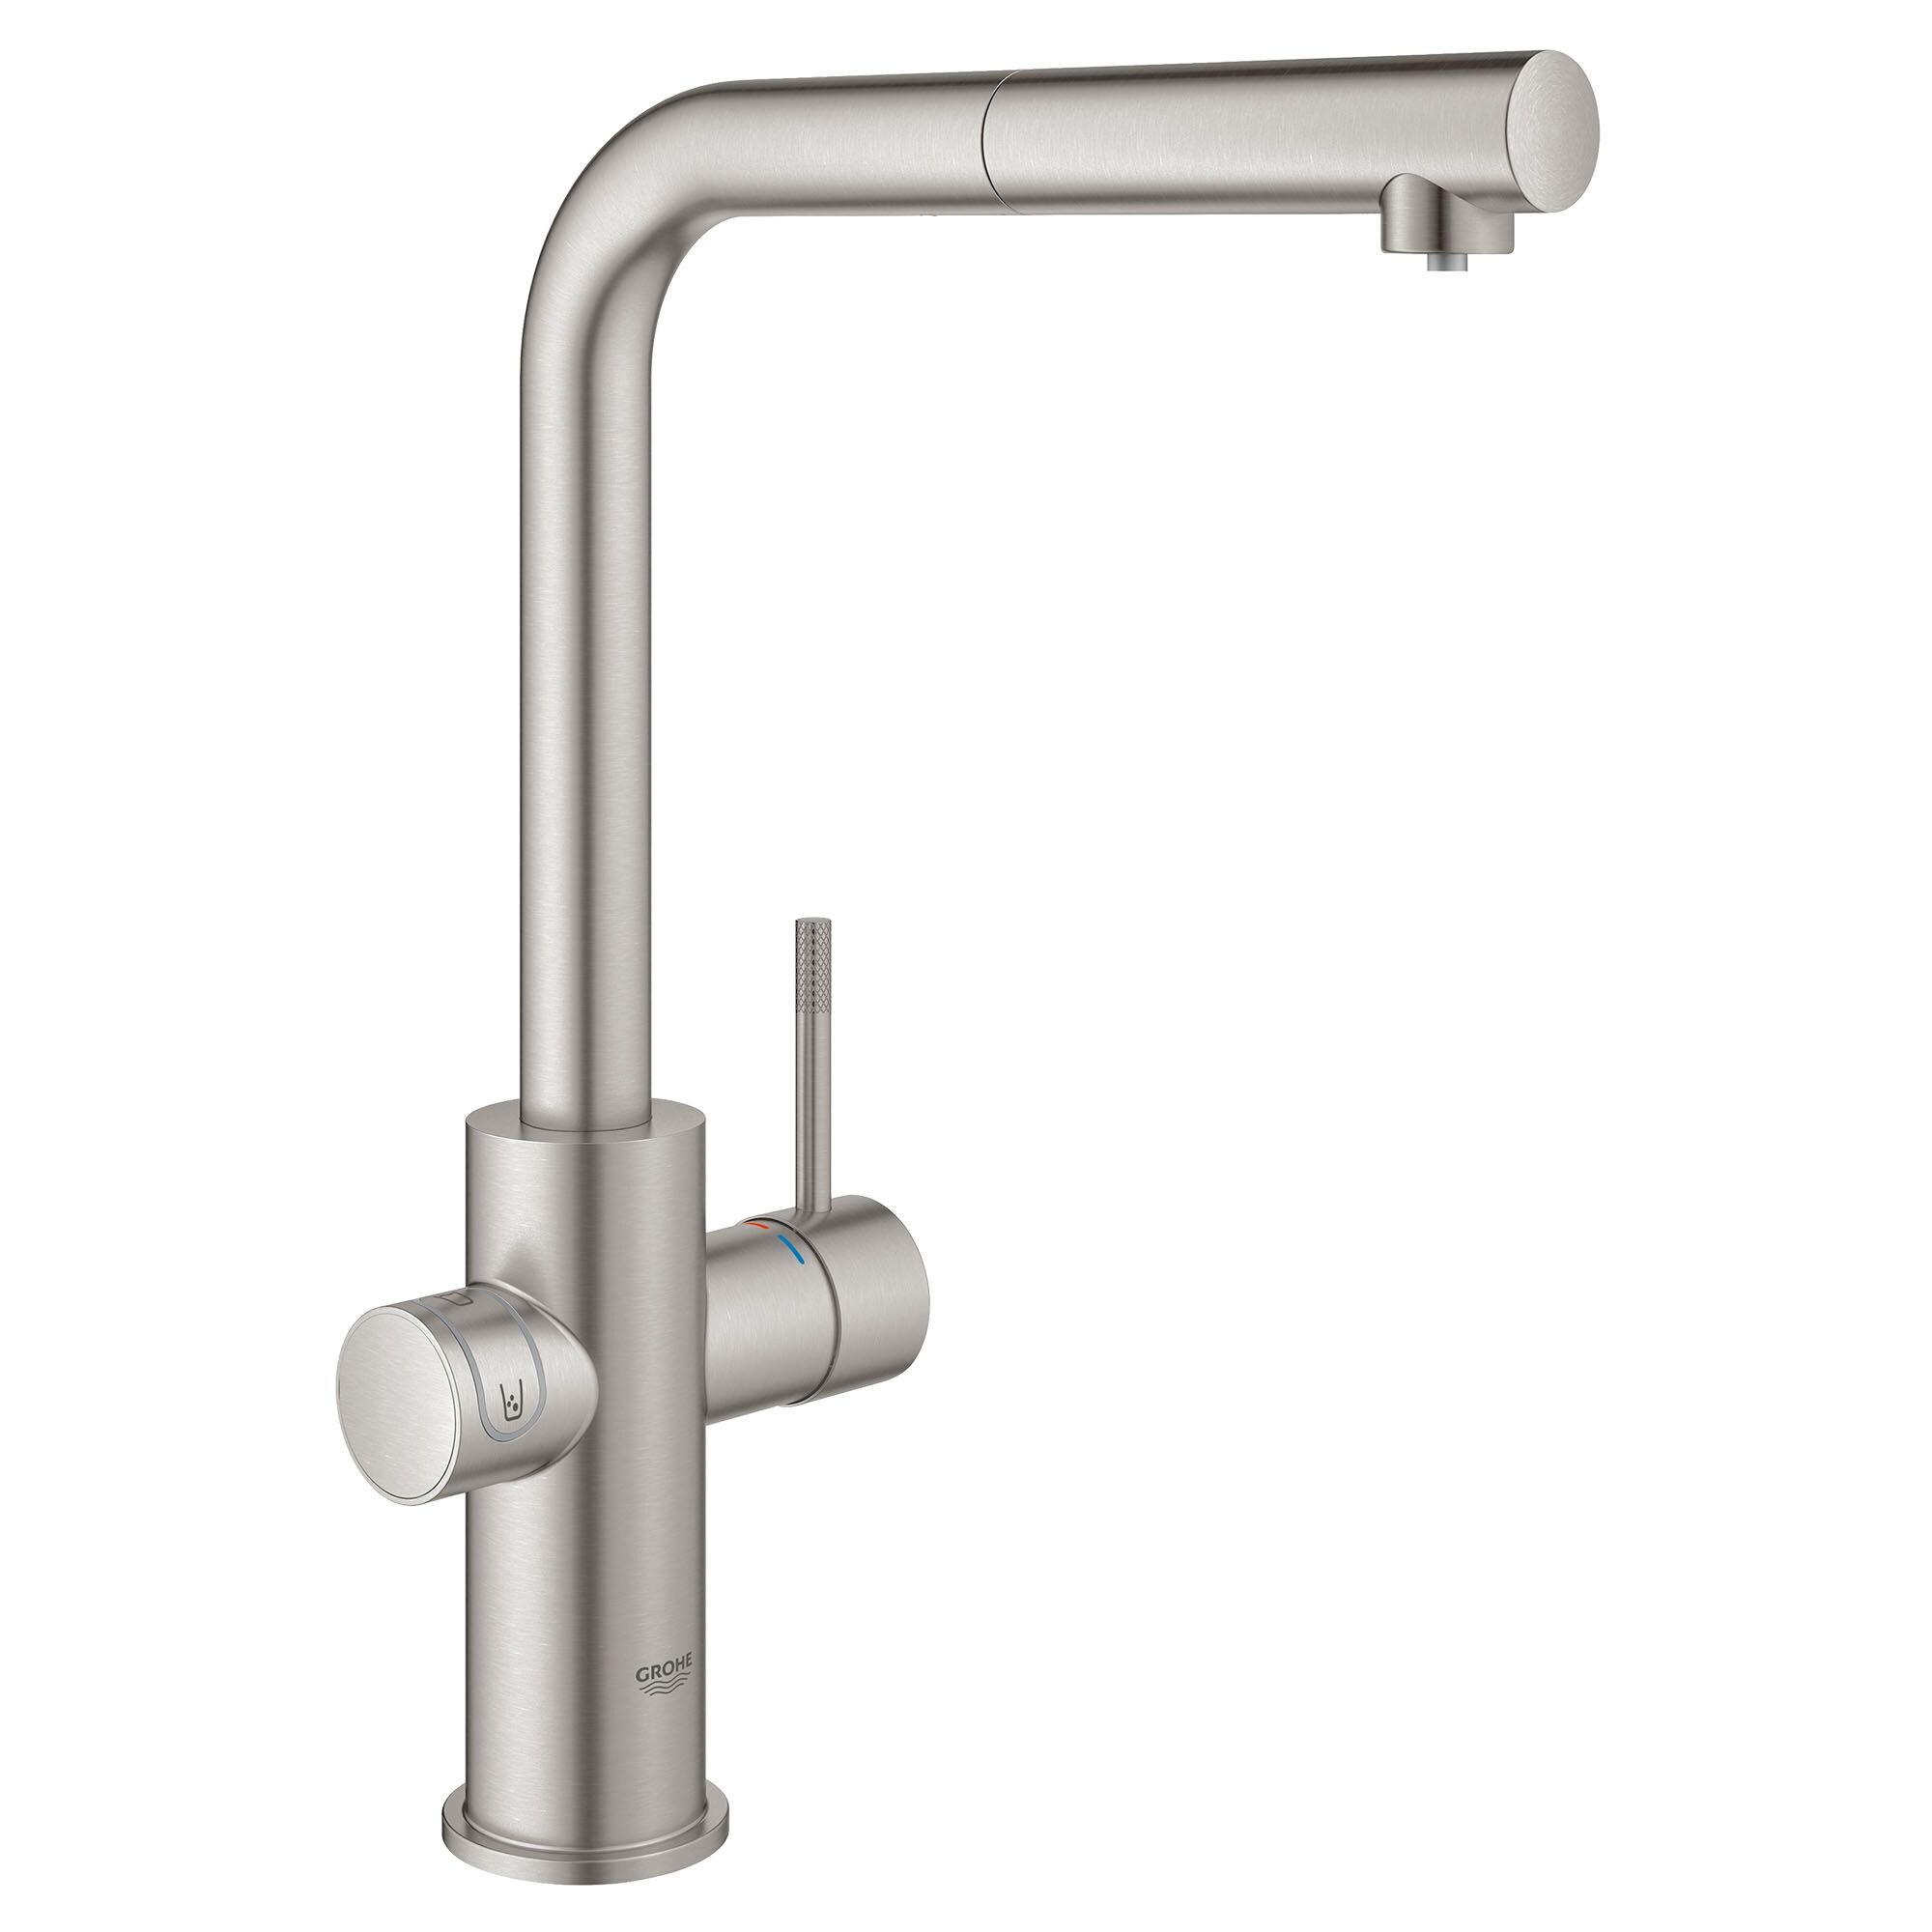 Michelangelo ontsnappen lobby GROHE Kitchen Faucets at Lowes.com